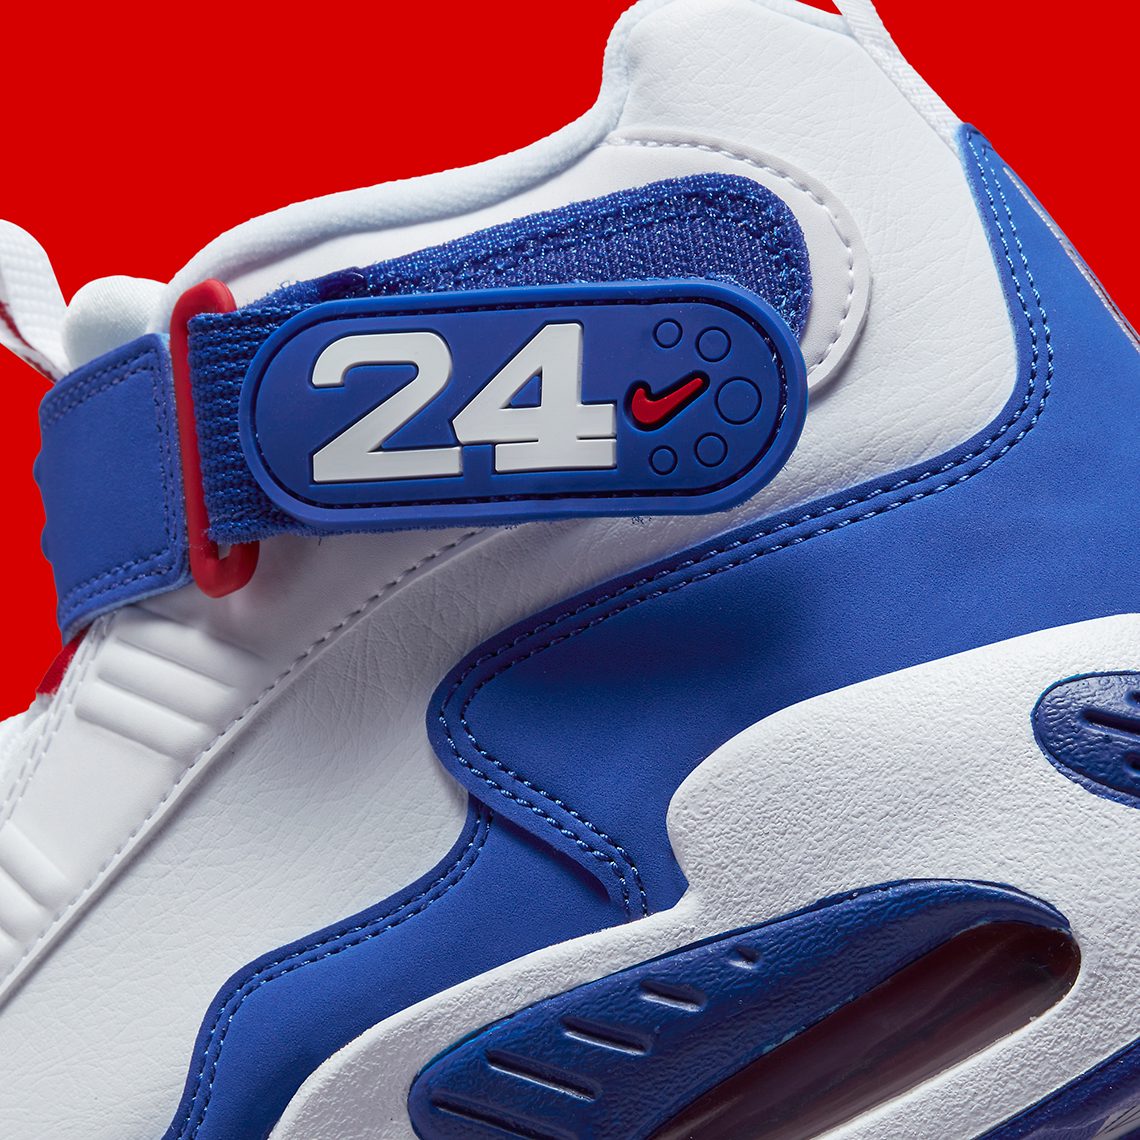 nike air griffey max 1 usa release date 8